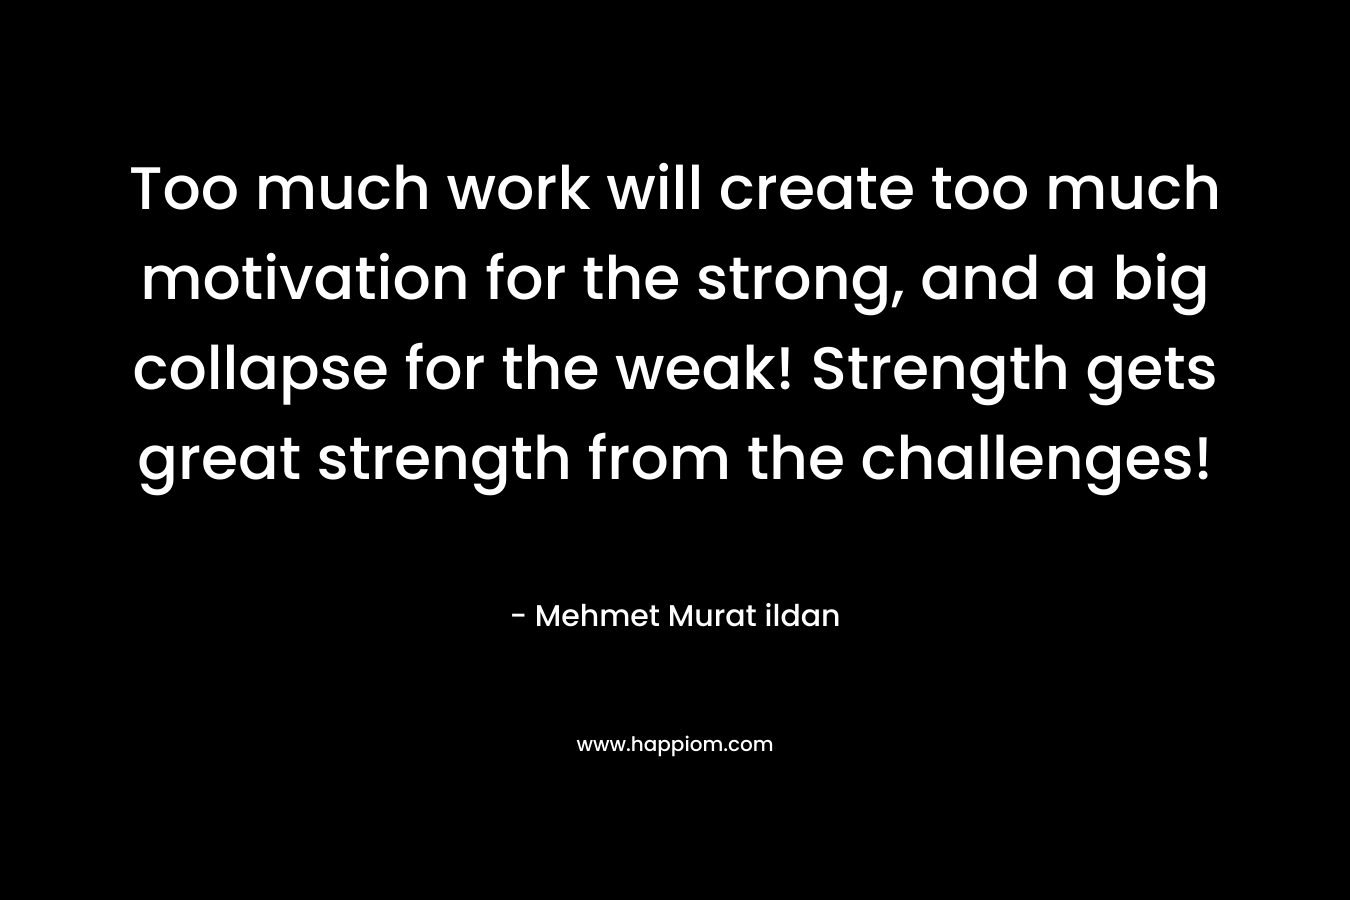 Too much work will create too much motivation for the strong, and a big collapse for the weak! Strength gets great strength from the challenges!